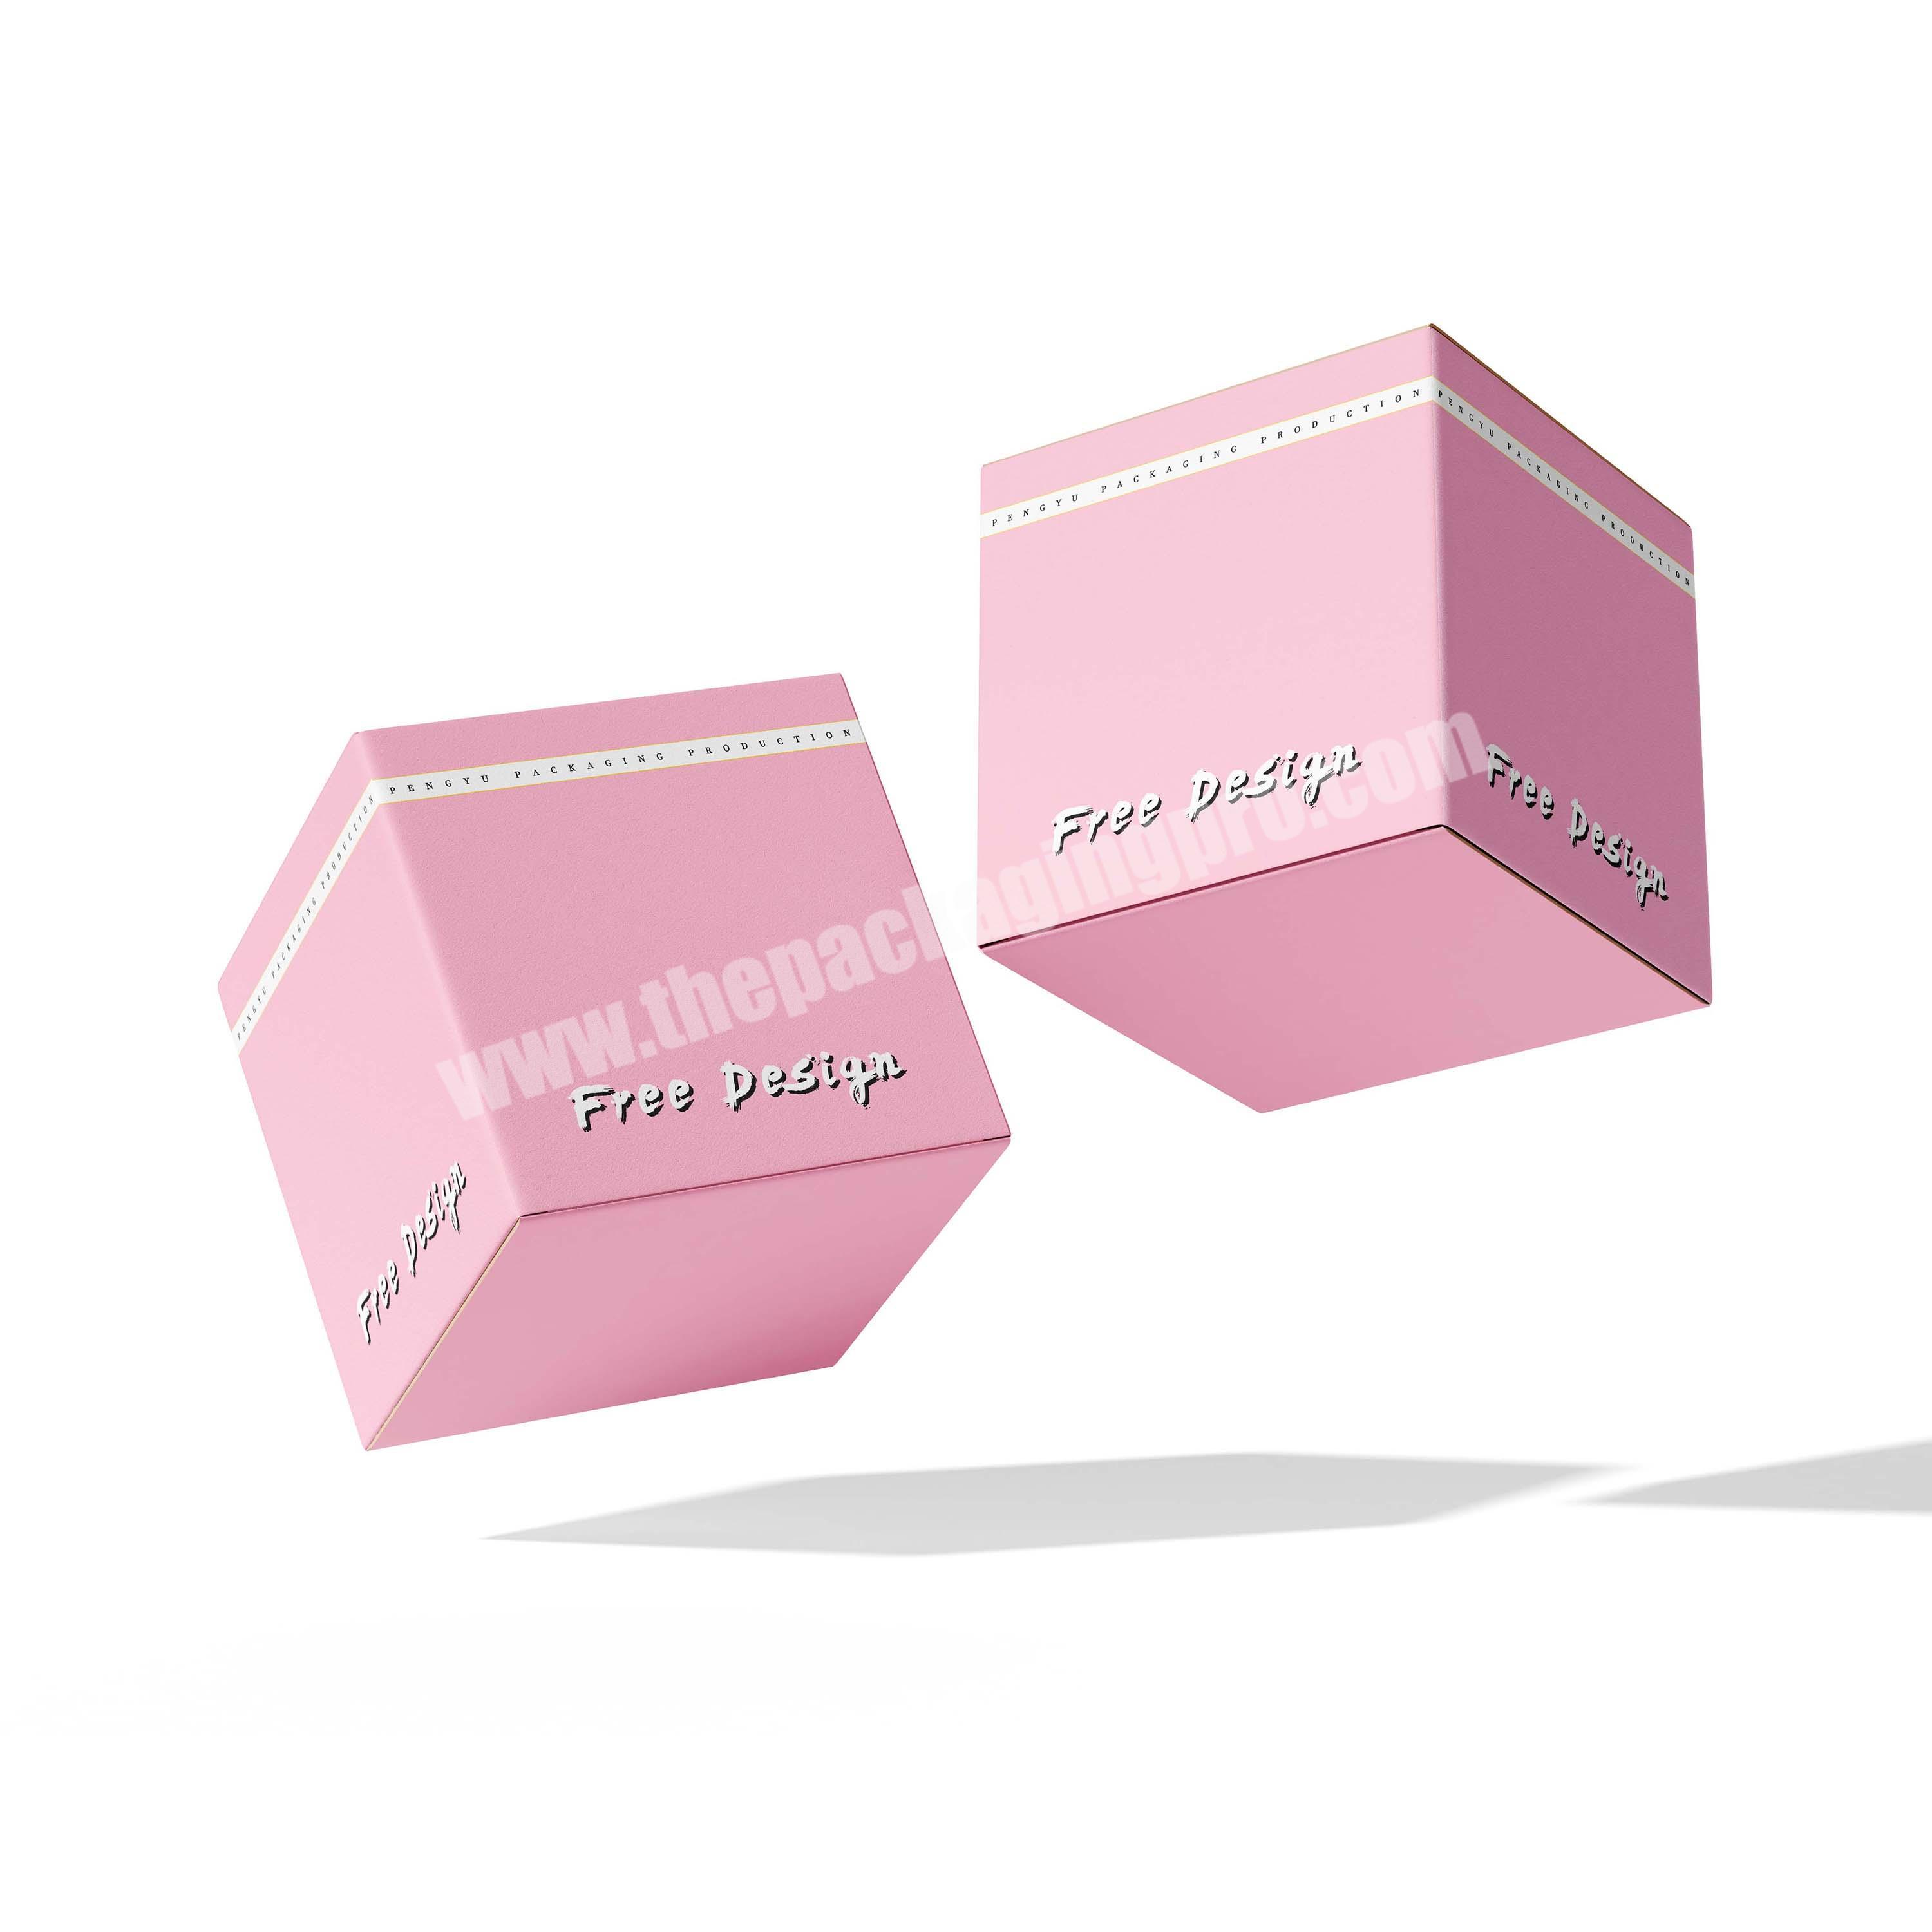 Bulk order for customize Nail Packaging Box Lotion Cardboard Box easy assemble paper box cosmetics